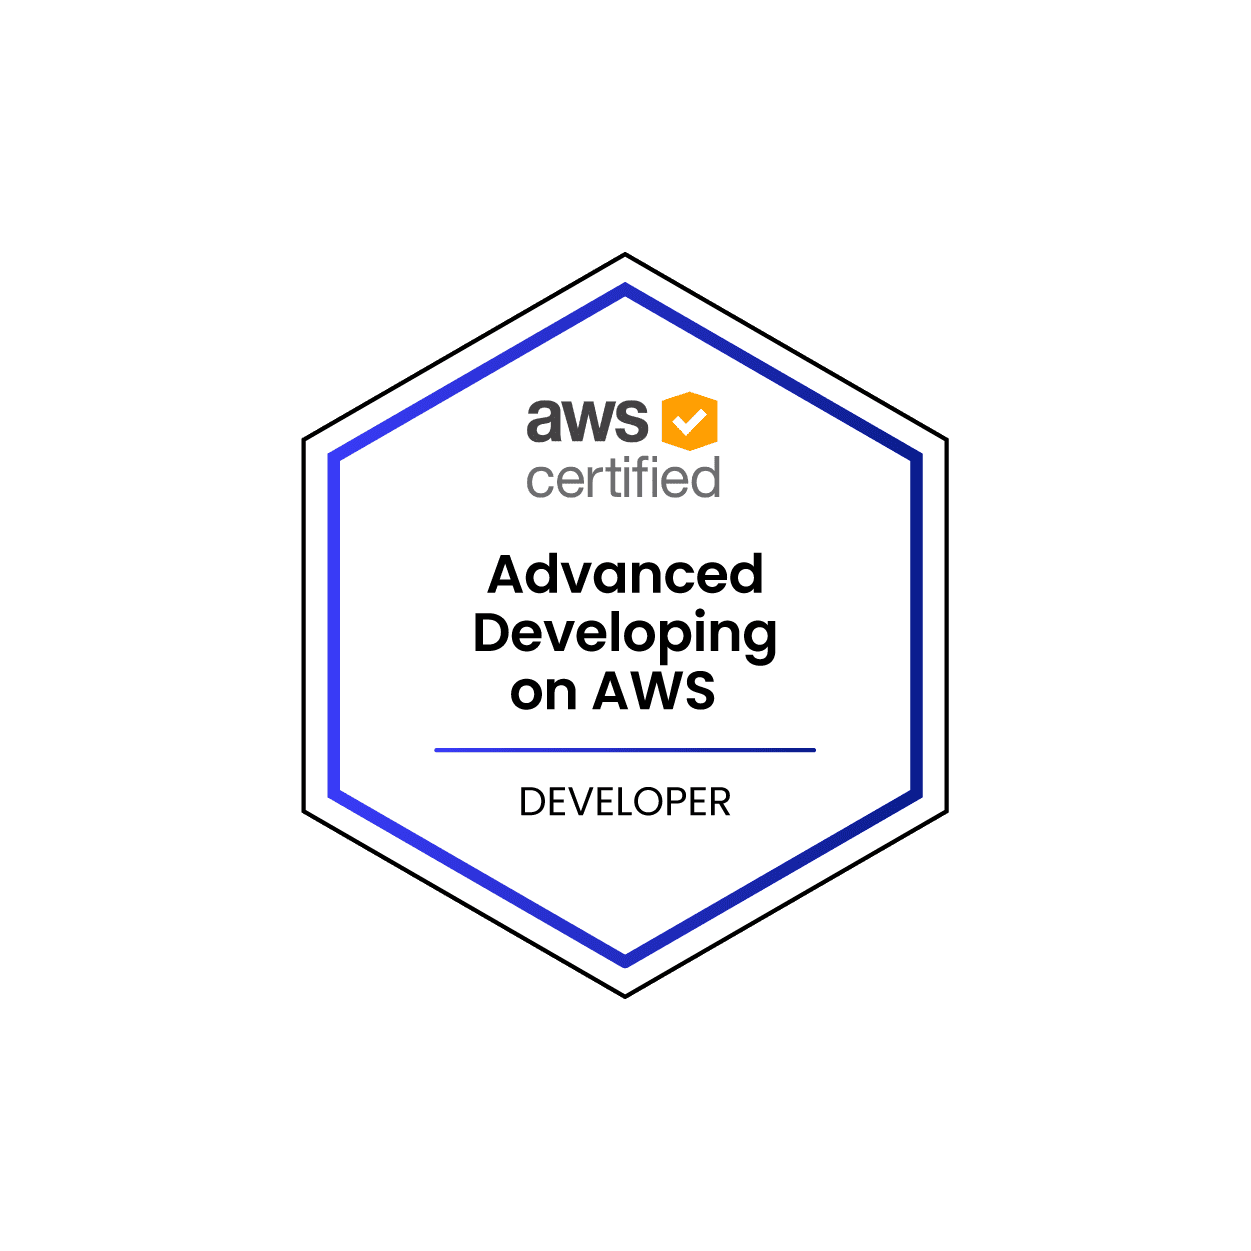 Advanced Developing on AWS